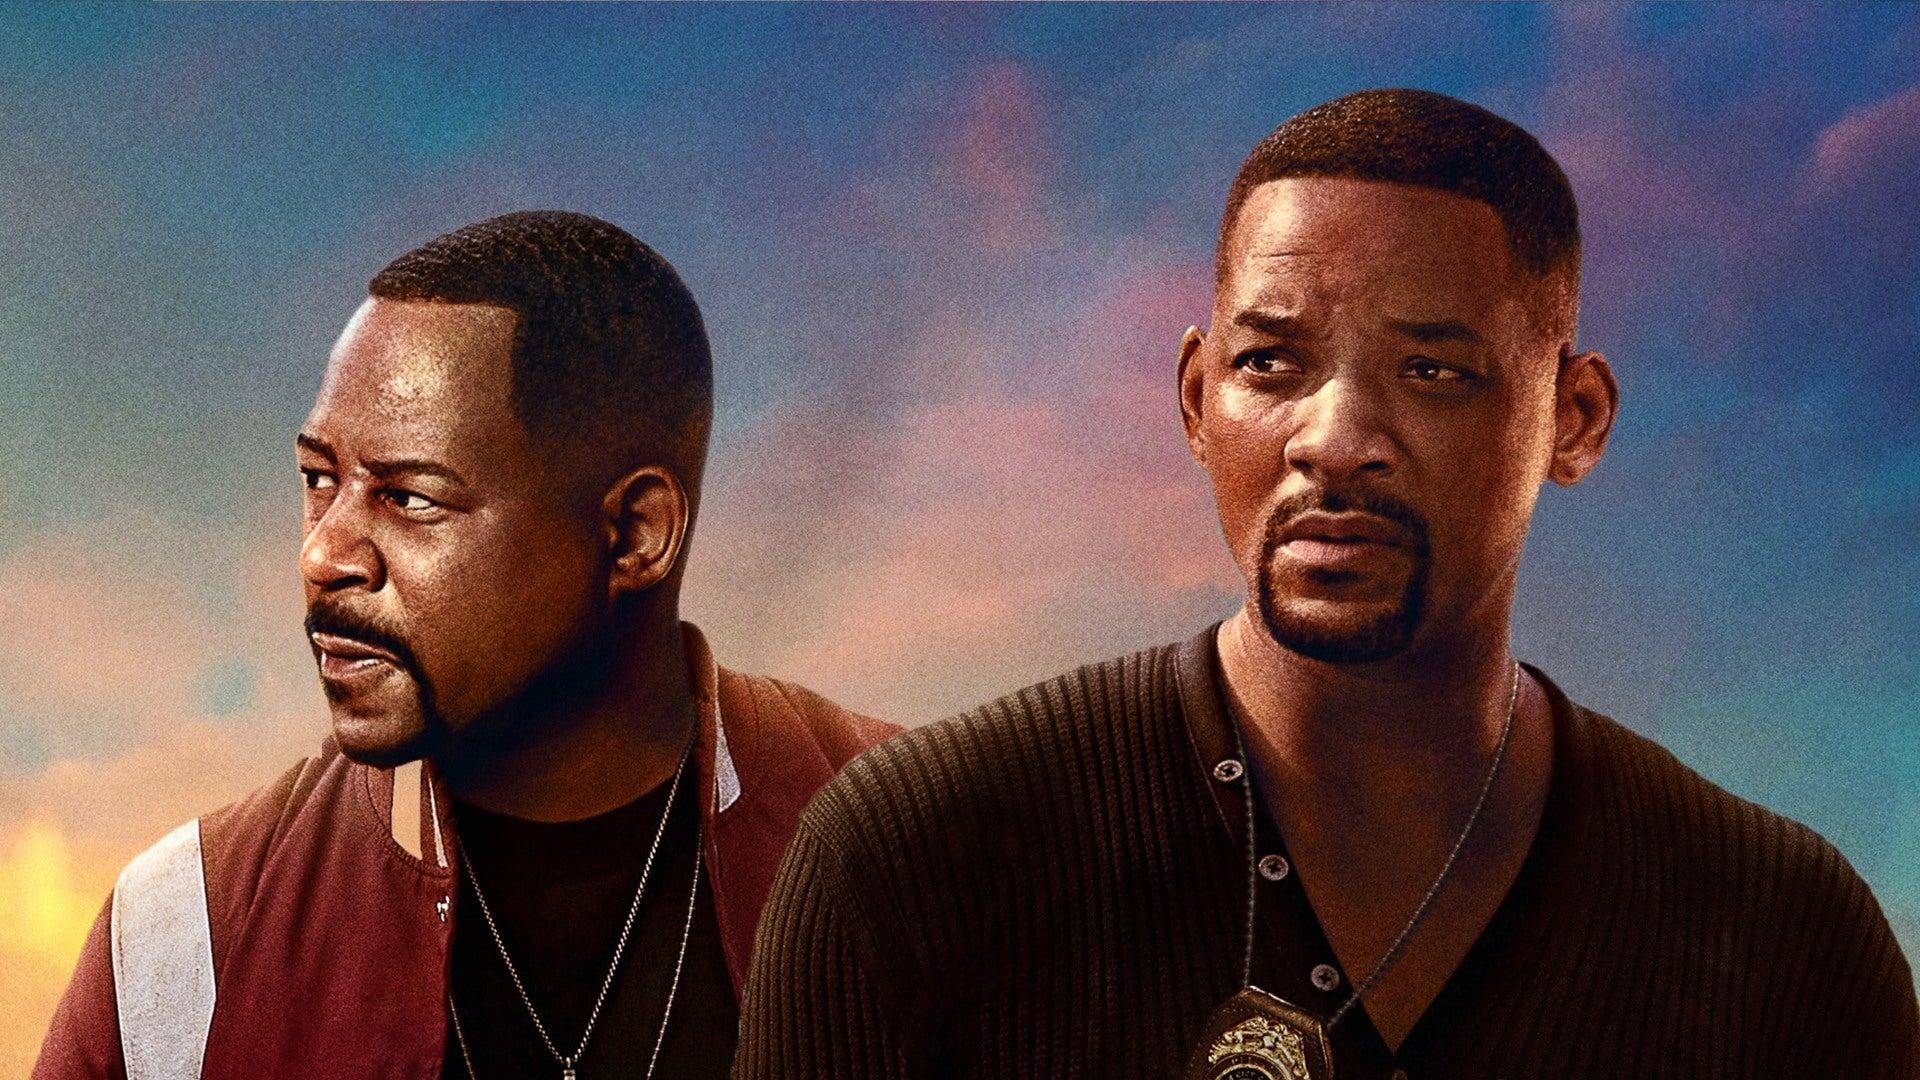 Bad Boys for Life Review